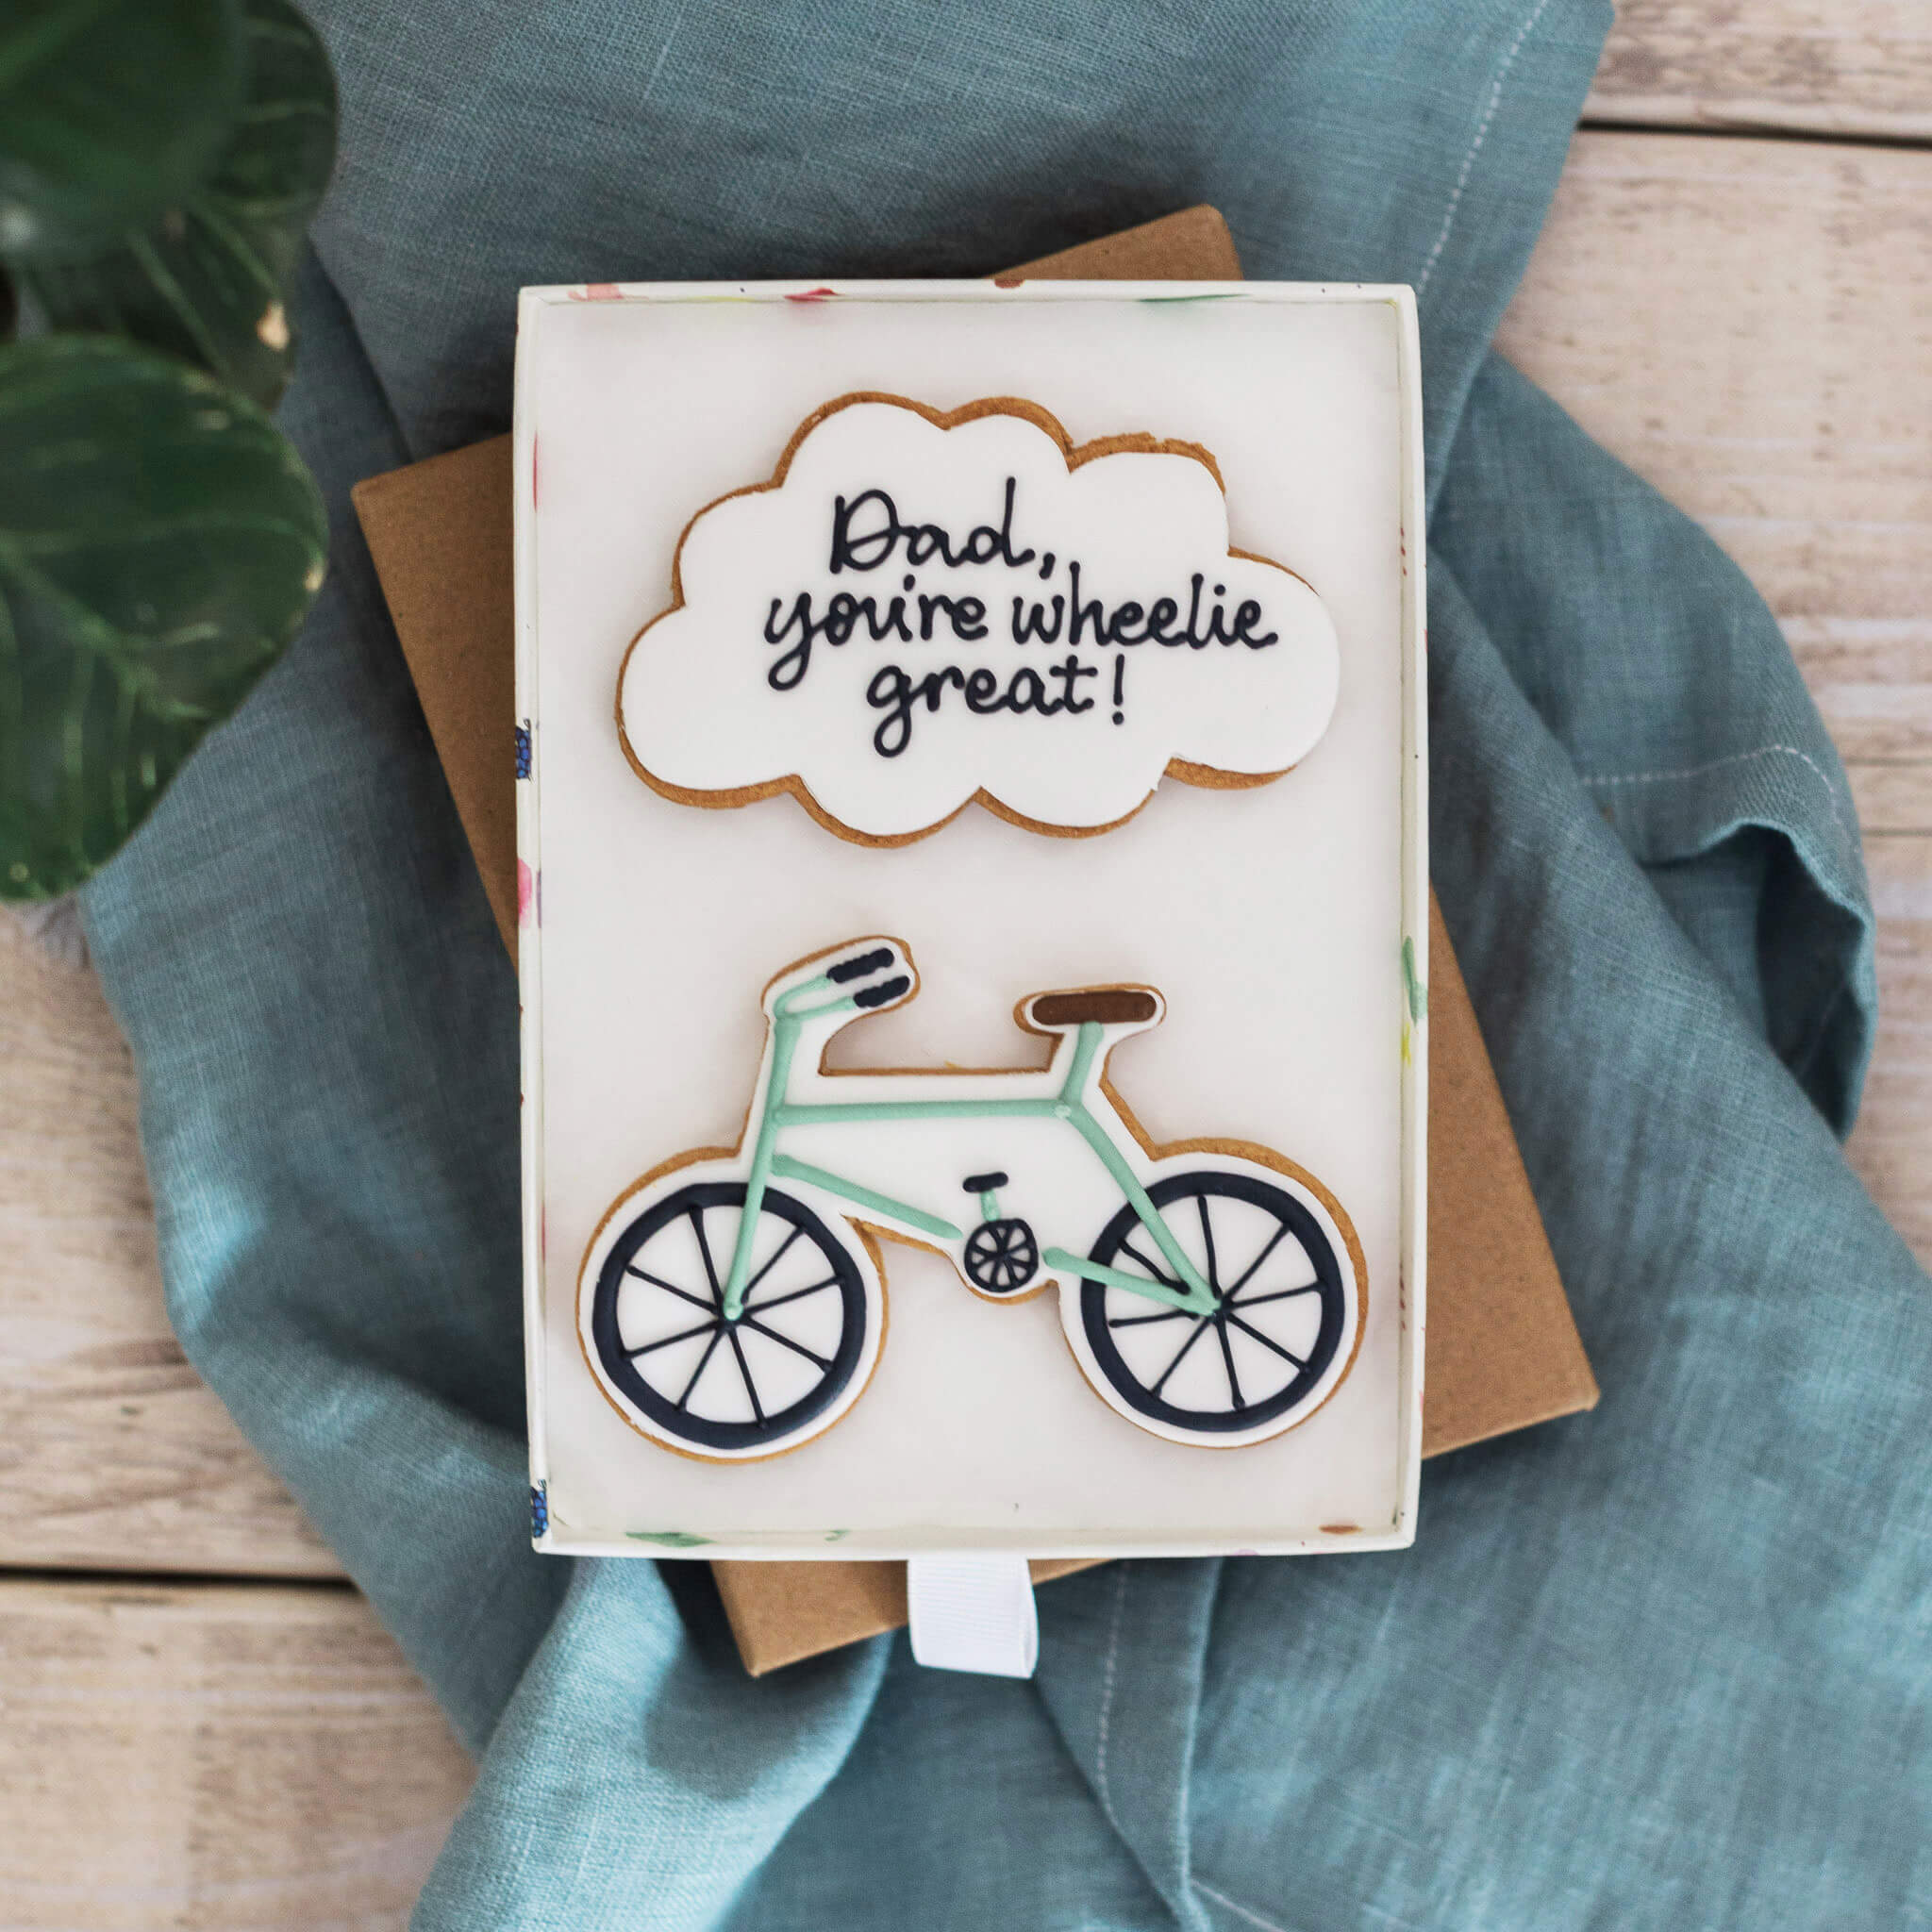 Image of Personalised Bicycle Biscuit Gift by Honeywell Bakes, designed, produced or made in the UK. Buying this product supports a UK business, jobs and the local community.